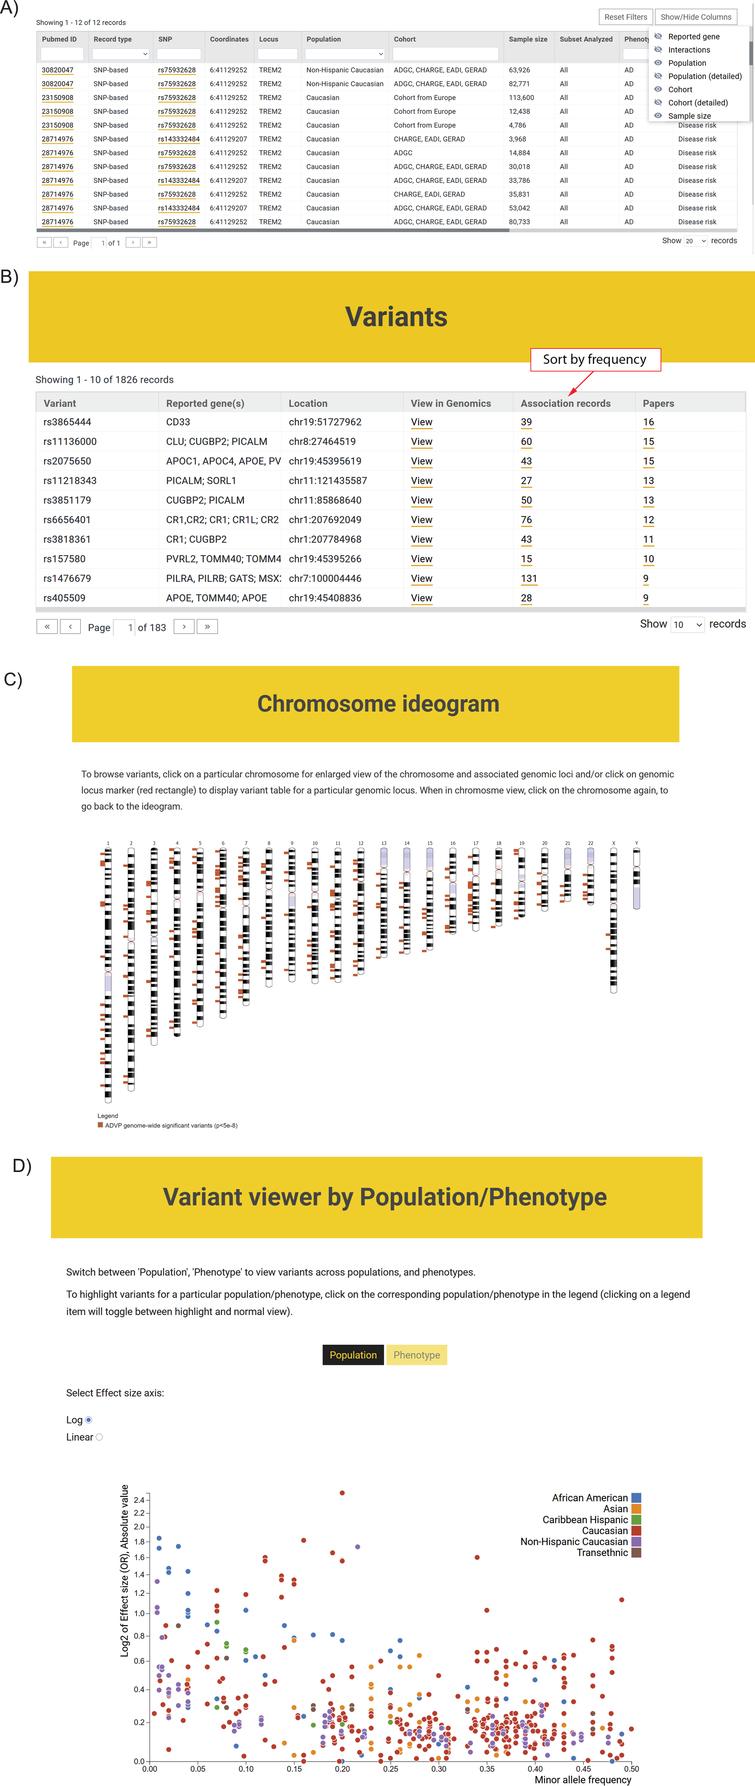 ADVP interface. A) Association records table. The displayed information can be customized via column/field selector and filtered using provided text and data filters; B) Top variants curated in ADVP. Variants are displayed according to the number of reporting publications by default; association records for variants and variant-related publications can be quickly accessed; C) Interactive chromosome ideogram-based view of association data; D) Interactive variant viewer by population and phenotype. Variants are arranged by their effect size (odds ratio; Y-axis) and allele frequency (X-axis) and color-coded by population and phenotype.